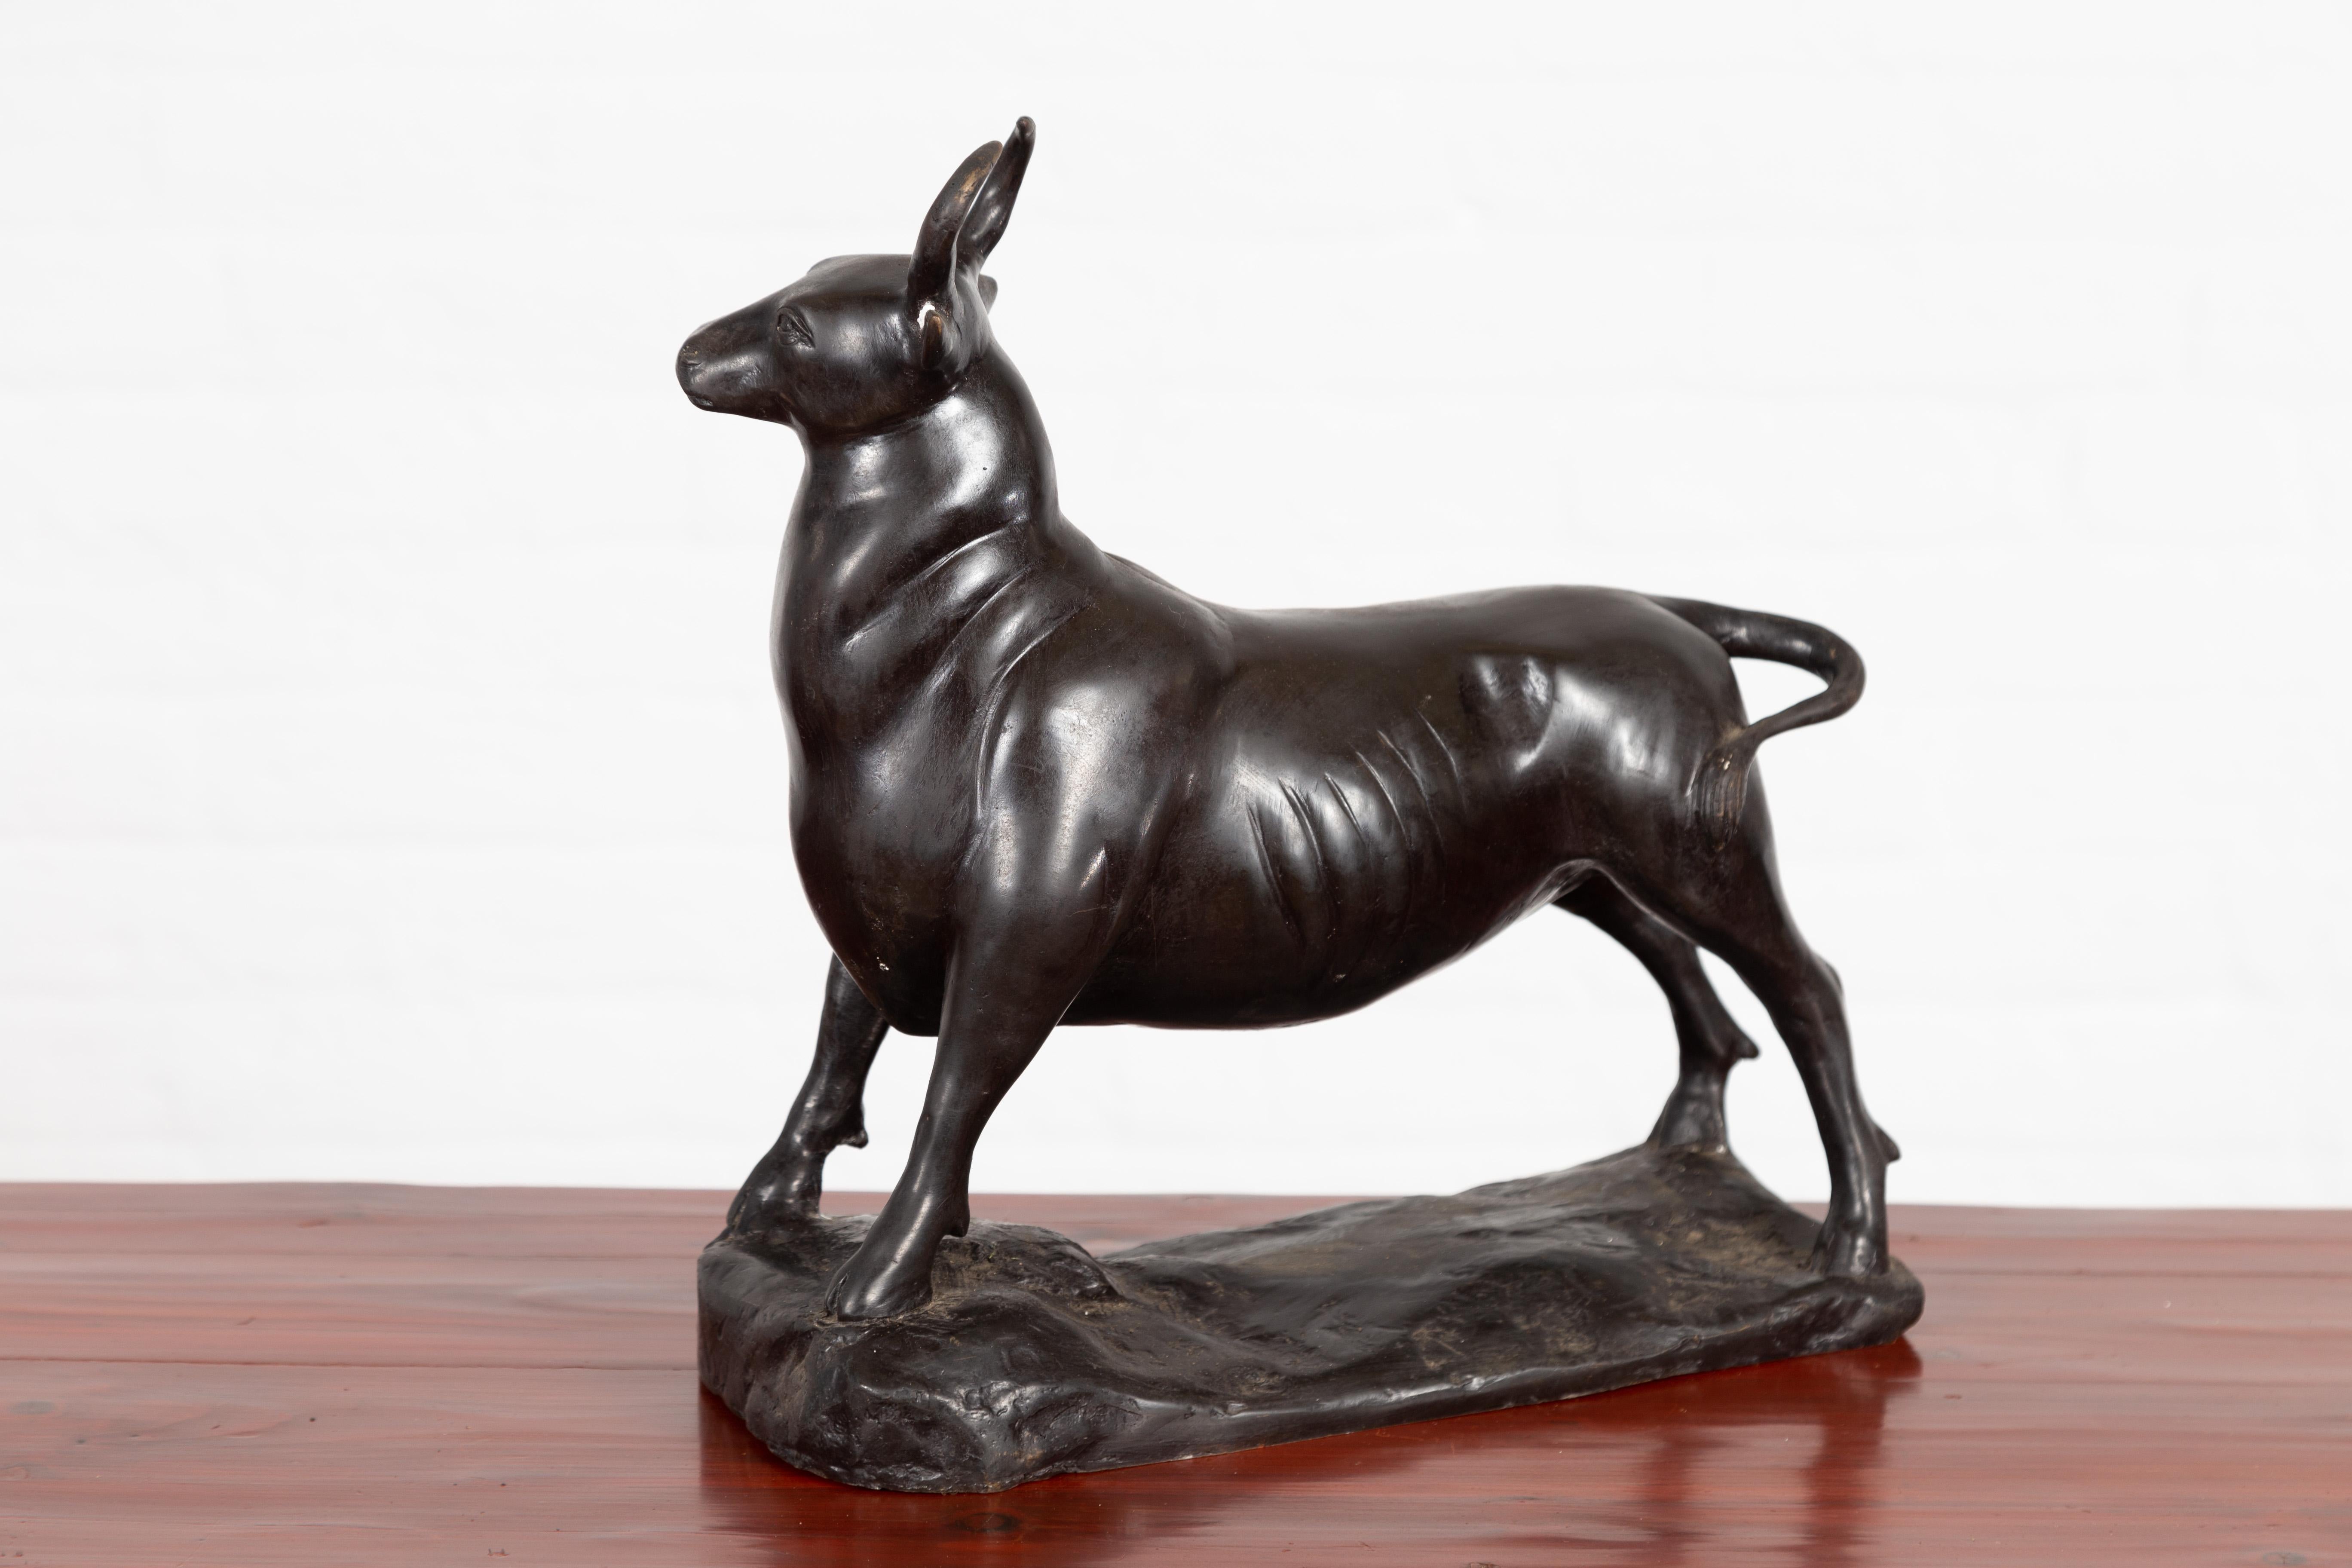 Contemporary Lost Wax Bronze Sculpture Depicting a Bull with Dark Patina For Sale 5